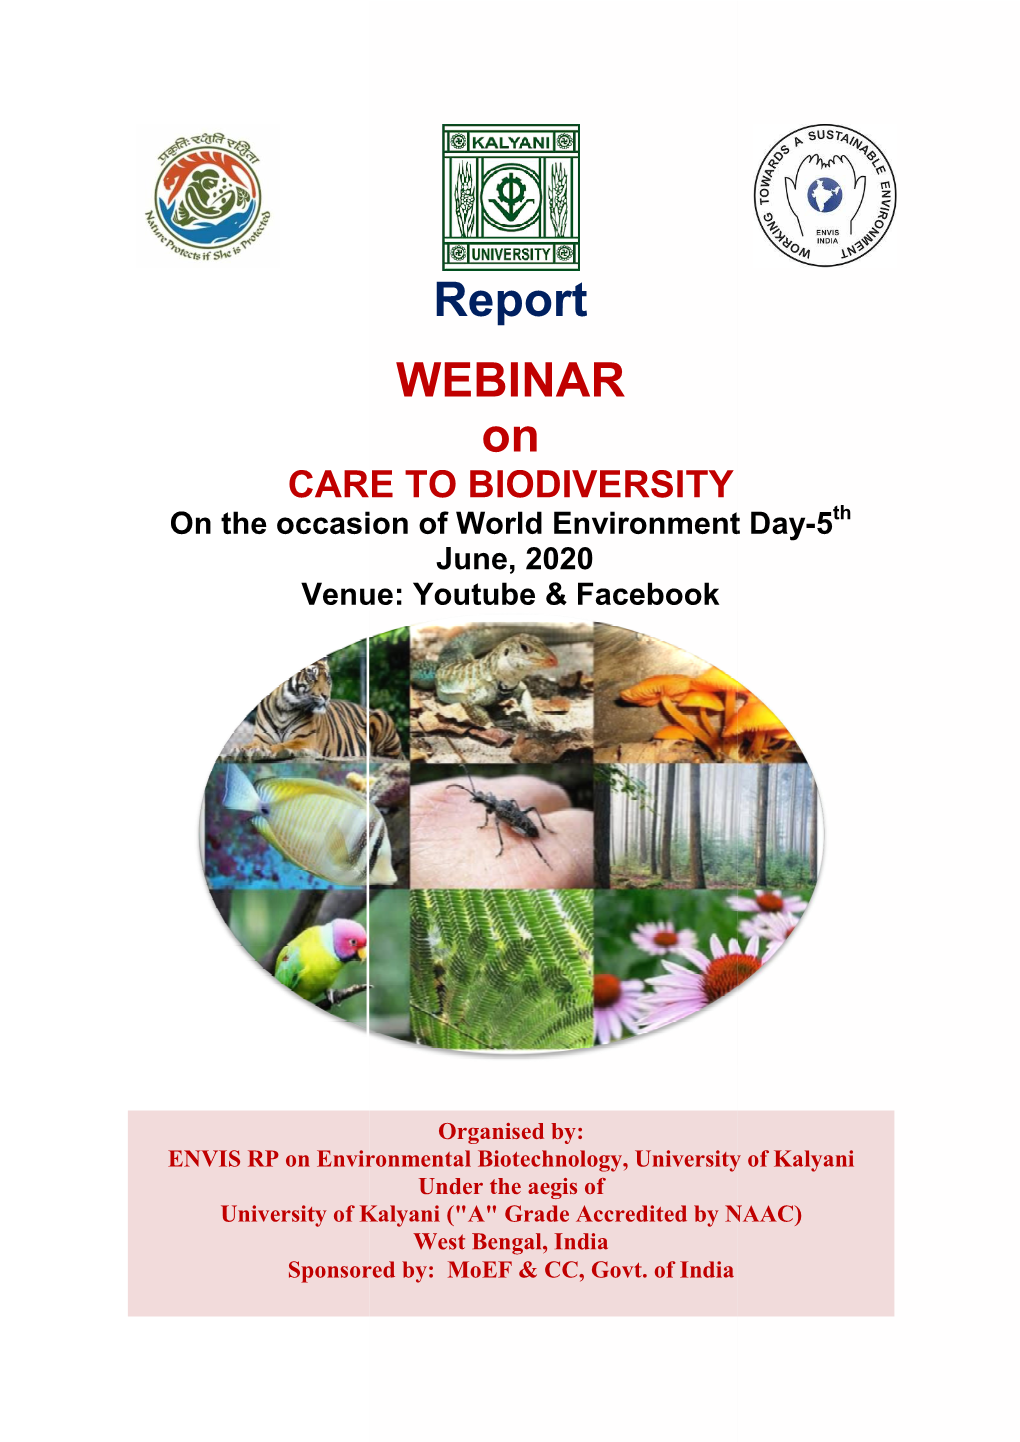 Report WEBINAR on CARE to BIODIVERSITY on the Occasion of World Environment Day-5Th June, 2020 Venue: Youtube & Facebook